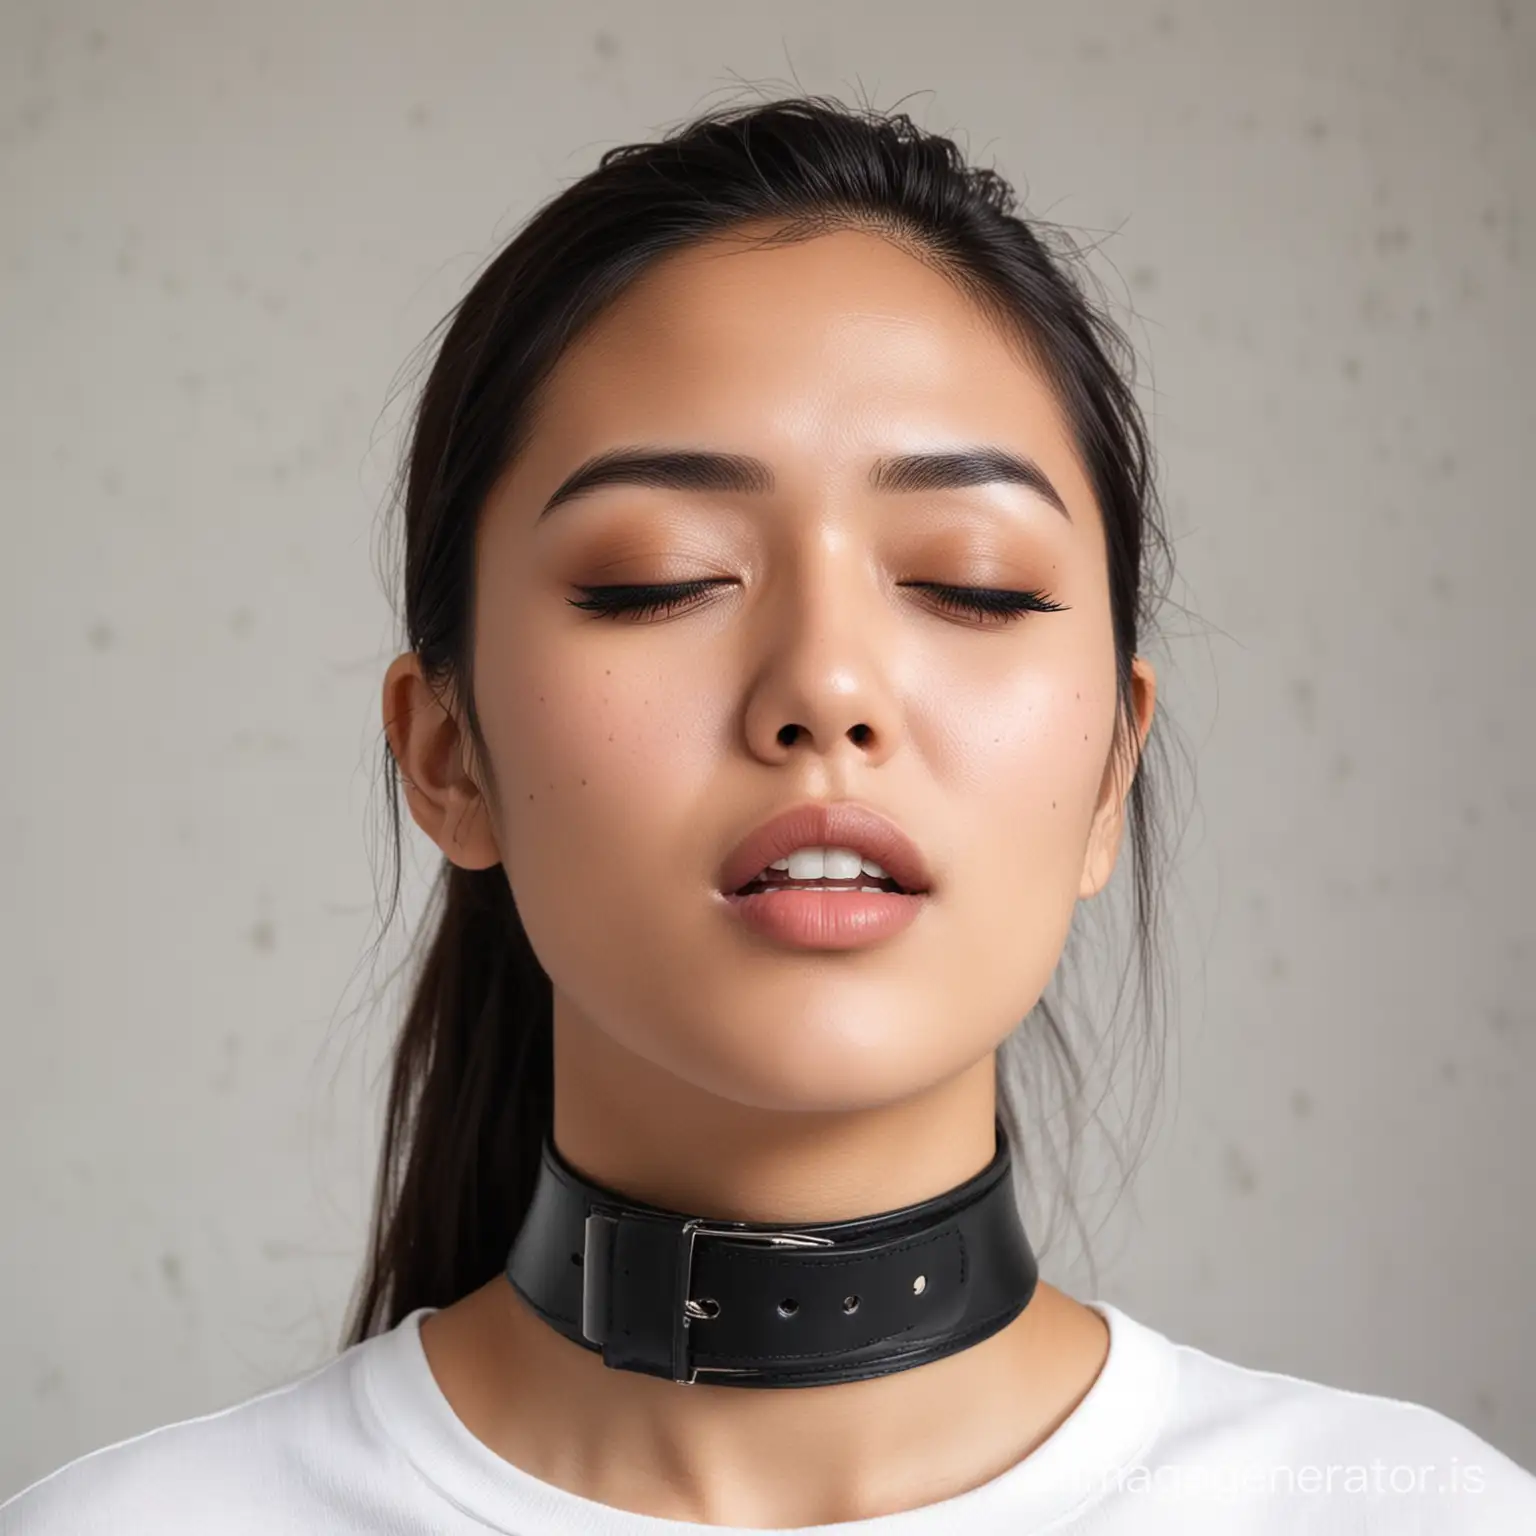 an indonesian young women, (bitting her lower lip while closing her eyes, furrowed his eyebrows, face facing upwards). wearing black tsirt, Choker belt. white Modern Architecture background.